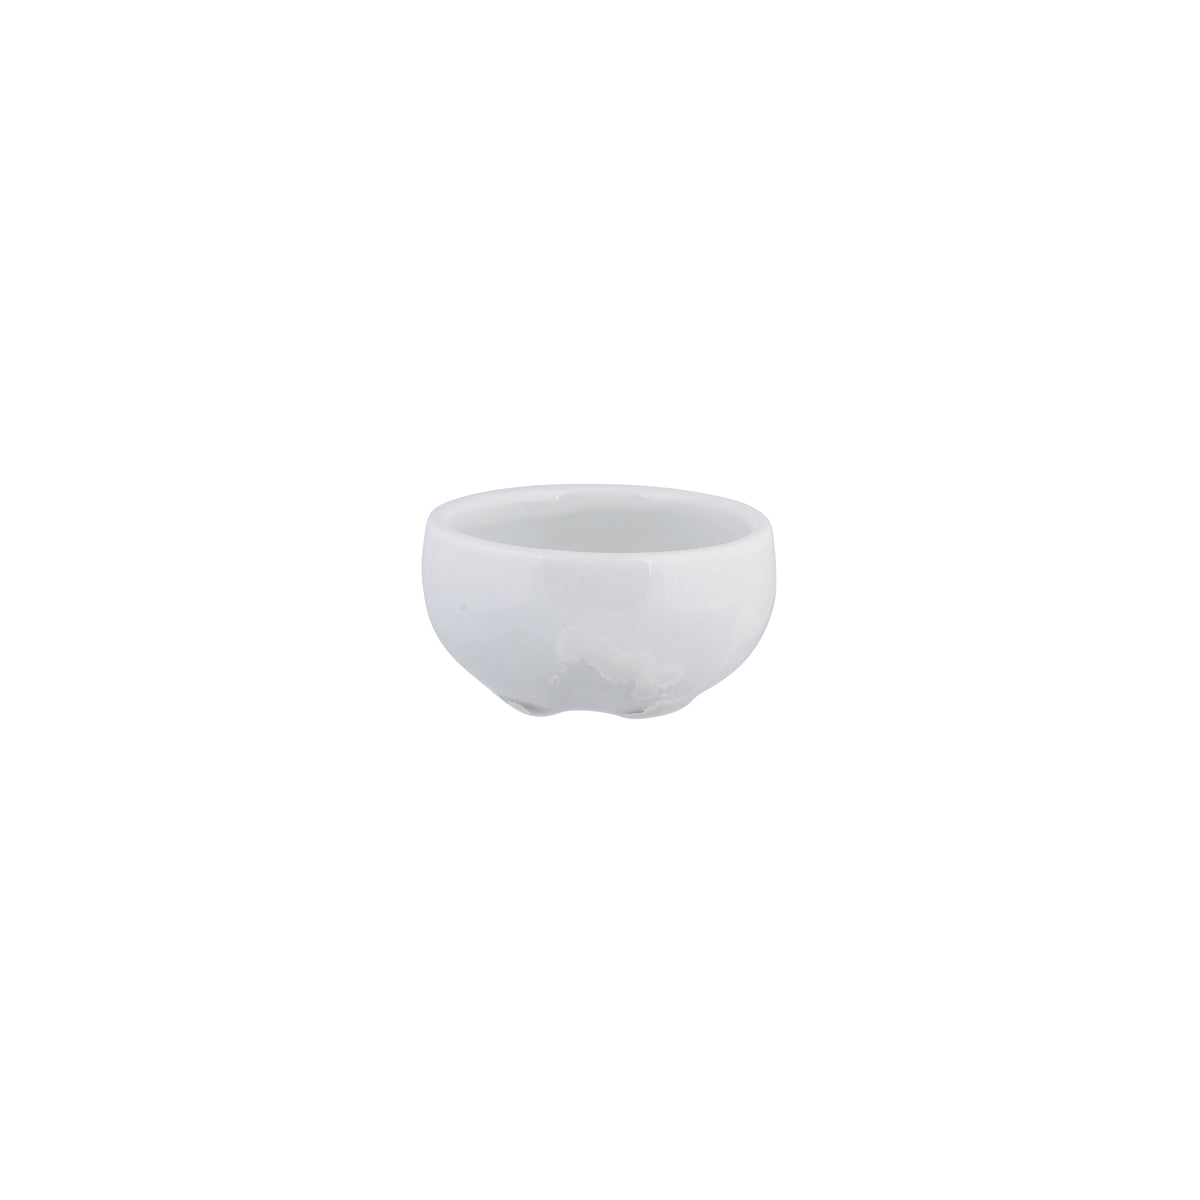 Ramekin - 75ml, Willow, Moda Porcelain from Moda Porcelain. made out of Porcelain and sold in boxes of 24. Hospitality quality at wholesale price with The Flying Fork! 